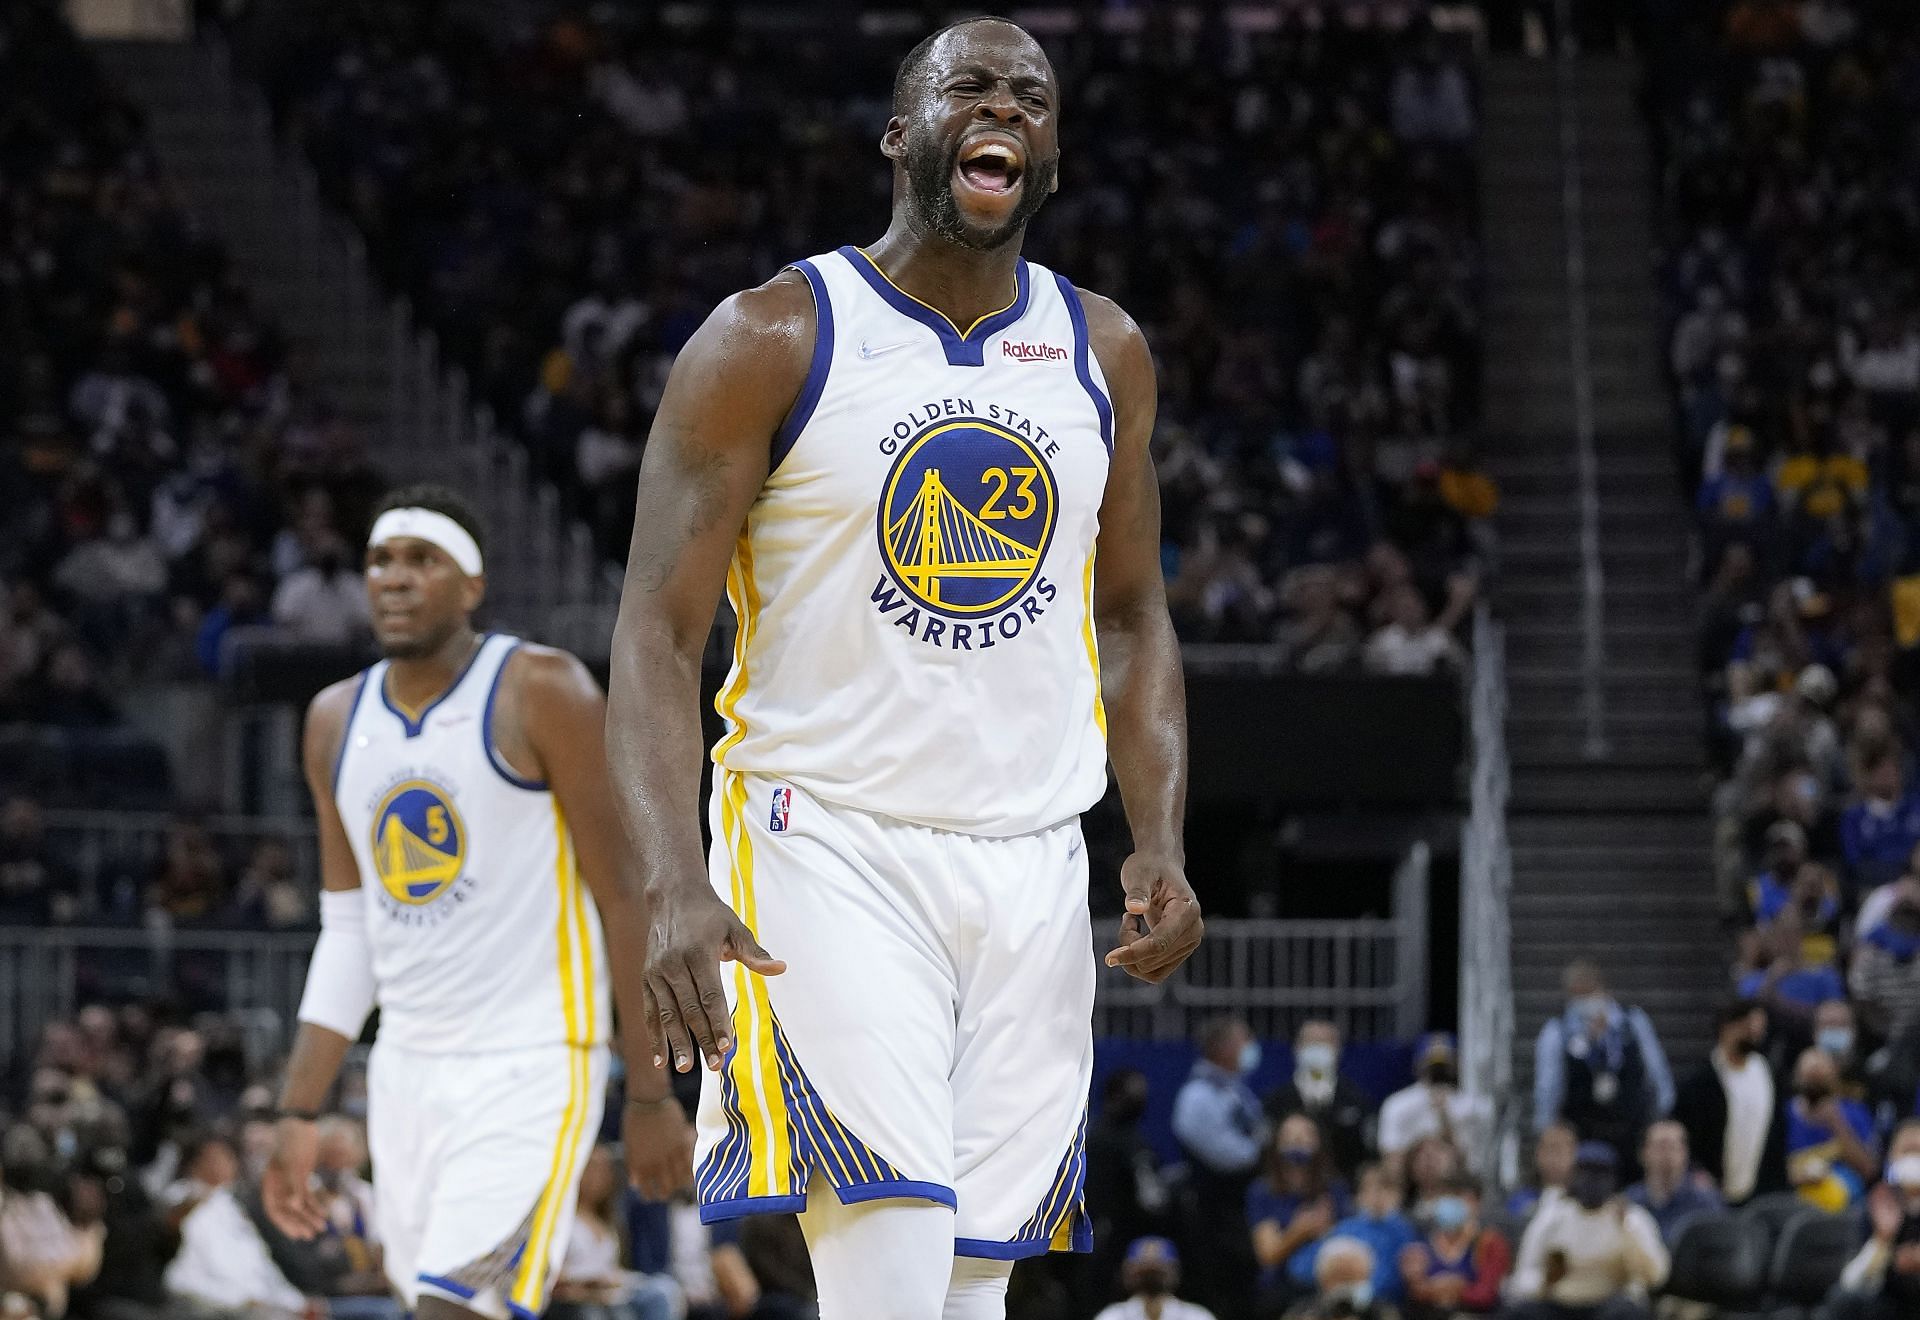 Draymond Green (#23) of the Golden State Warrior